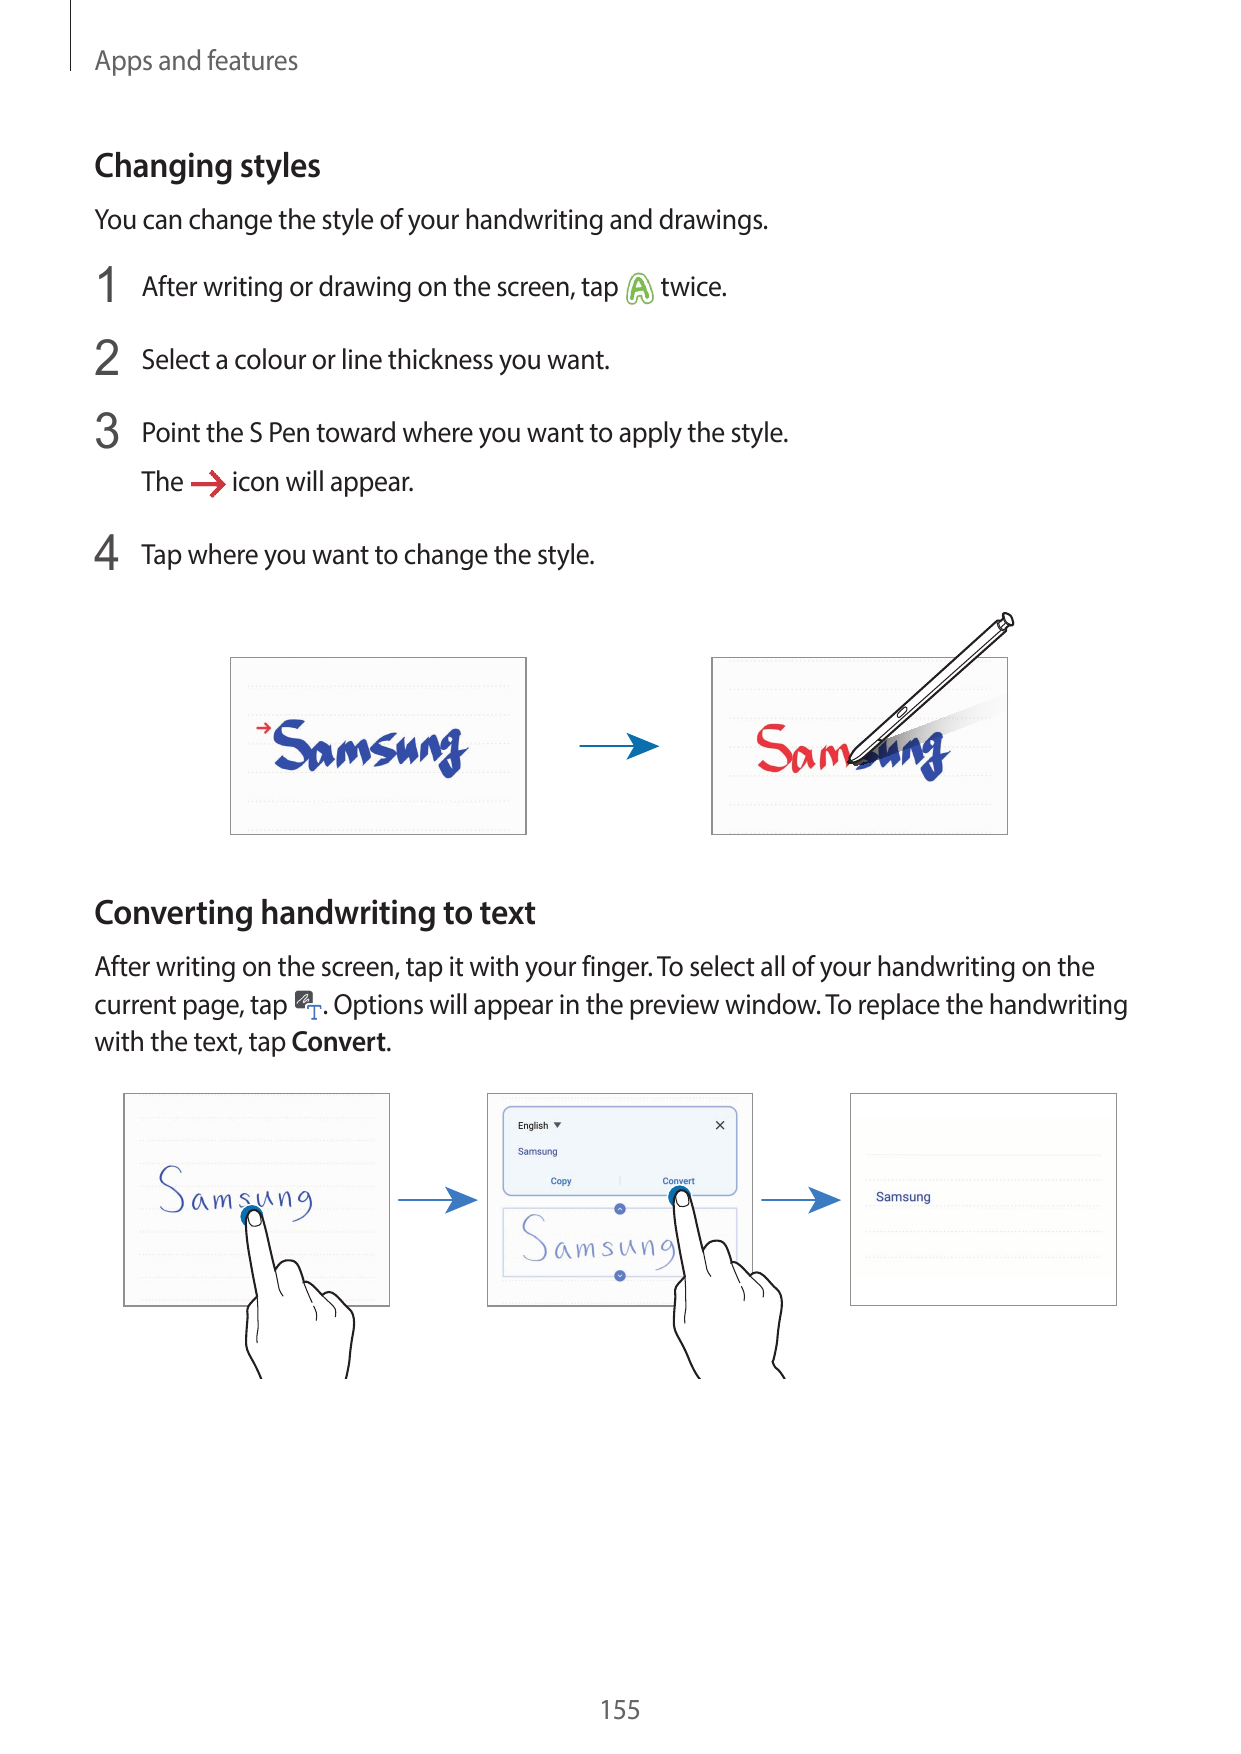 Apps and featuresChanging stylesYou can change the style of your handwriting and drawings.1 After writing or drawing on the scre